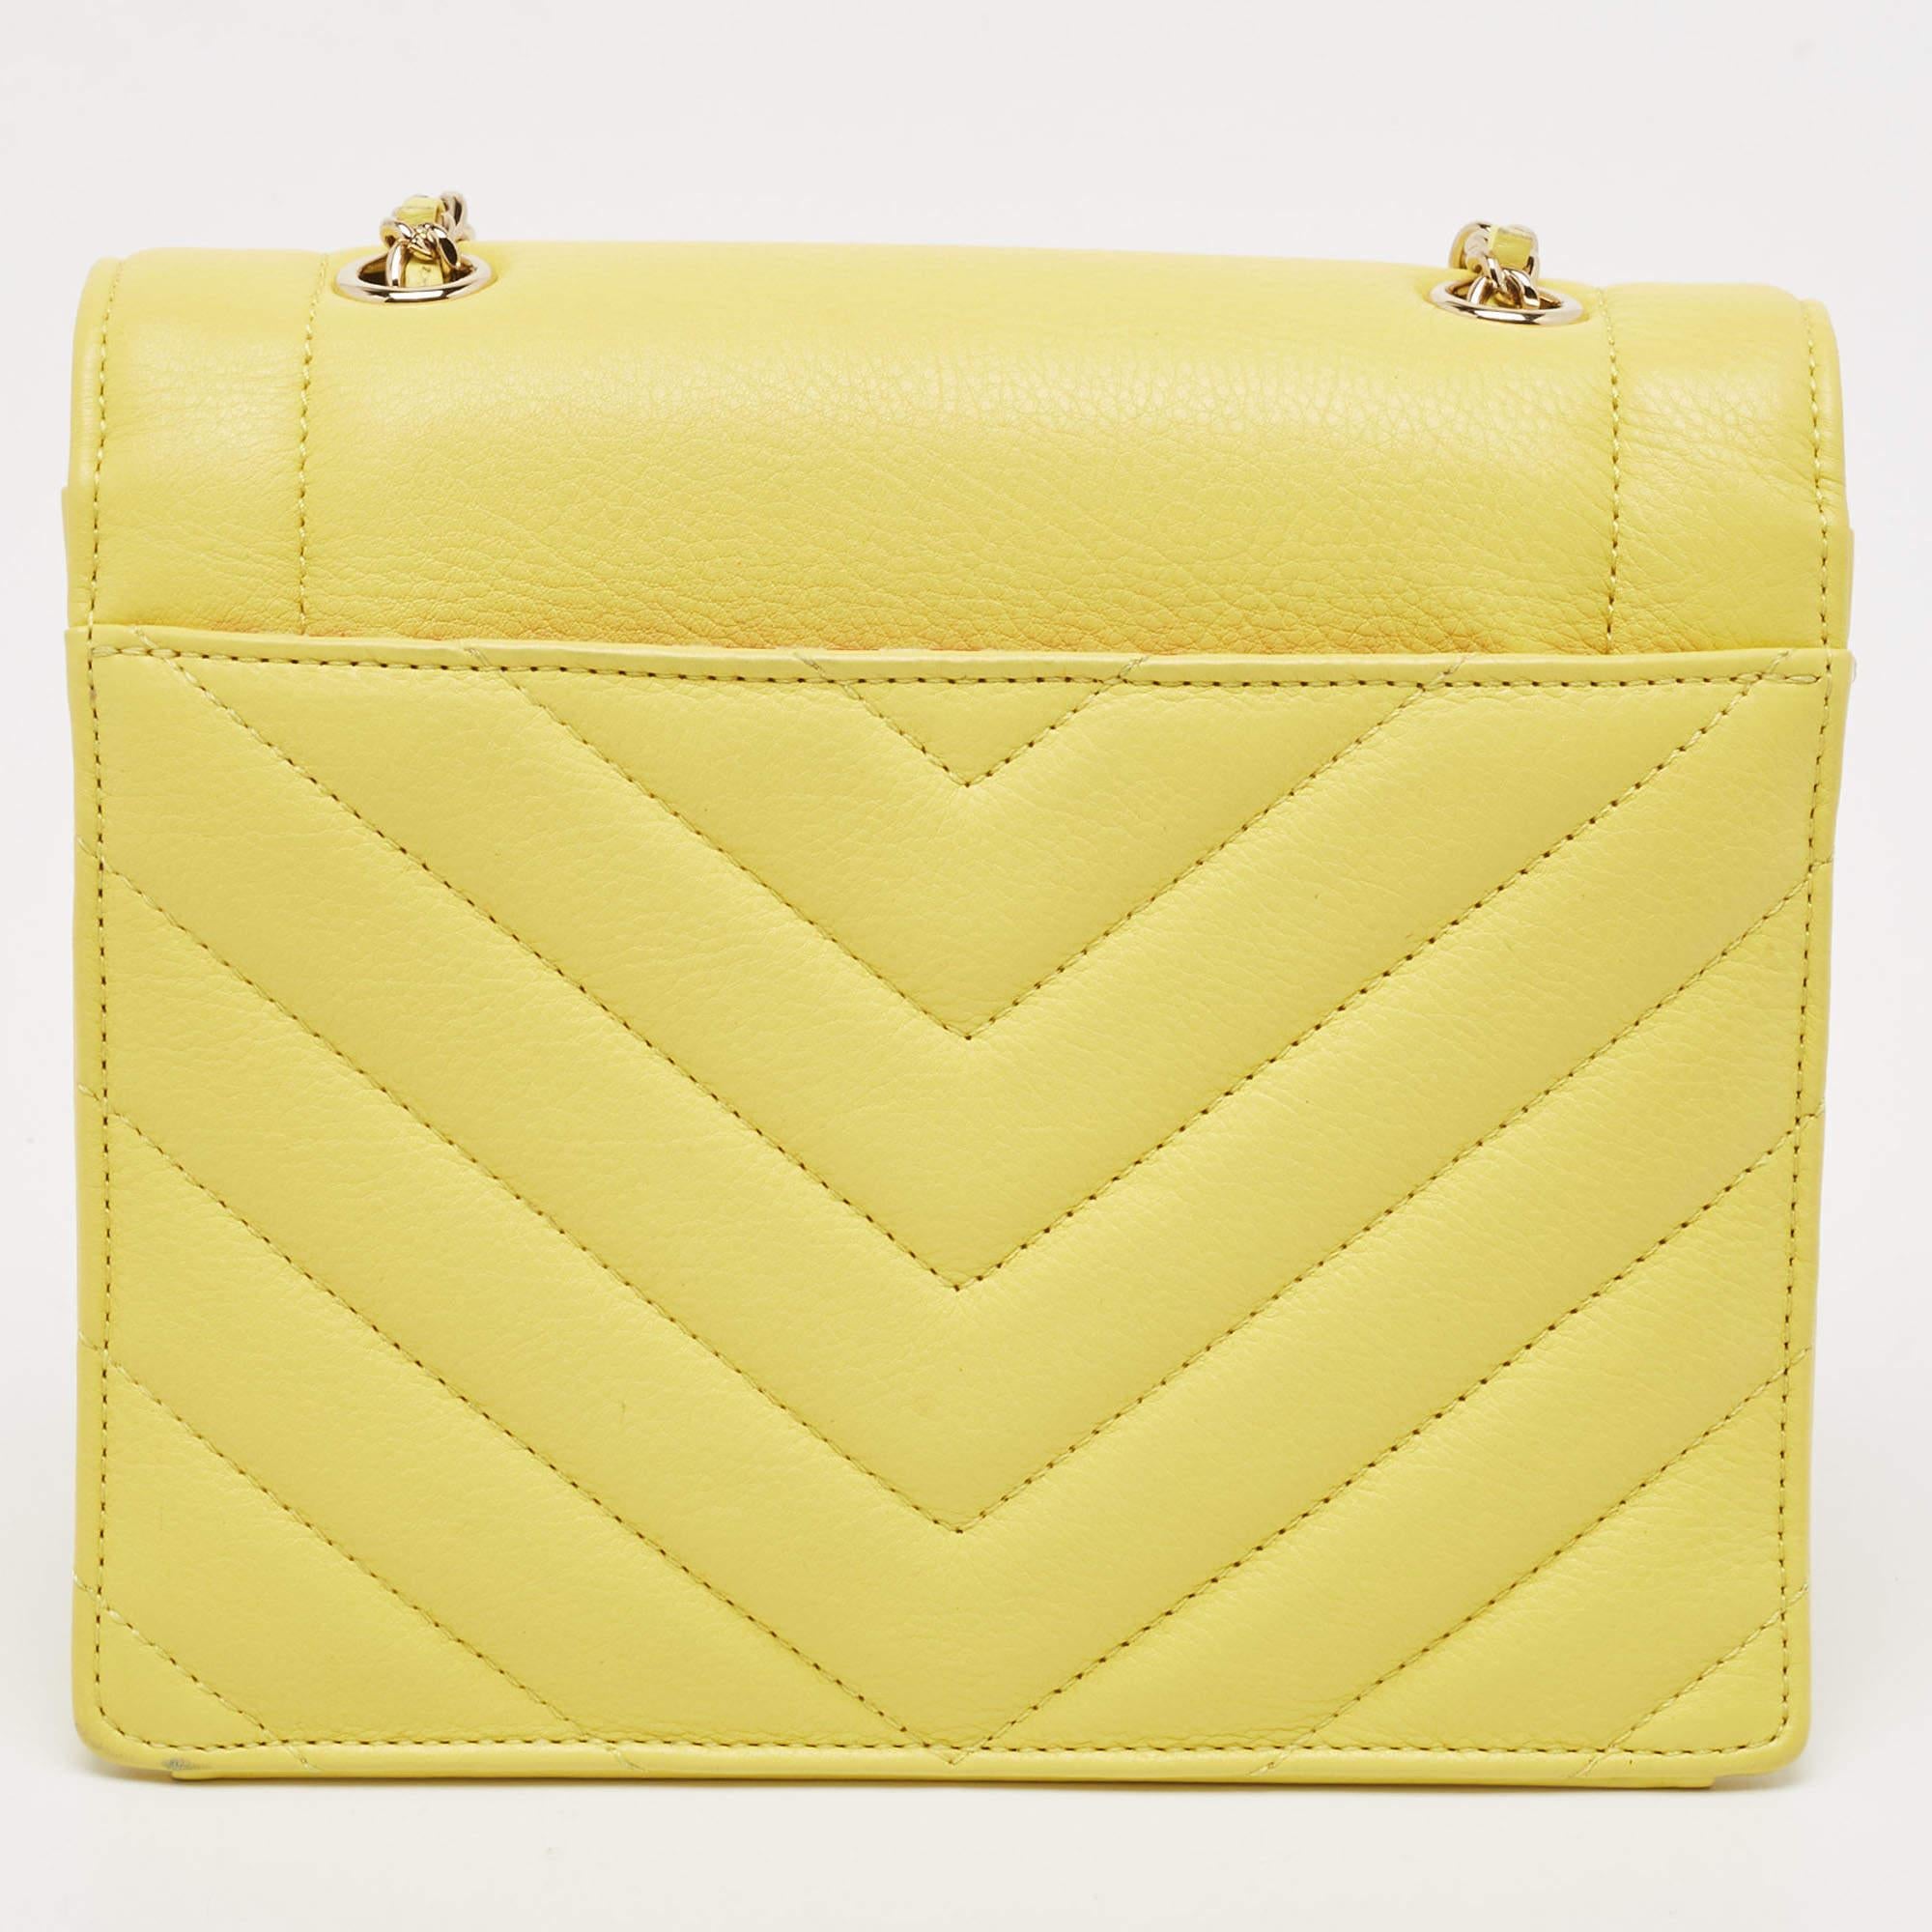 Chanel Yellow Leather Small Vintage Chevron Flap Bag 1